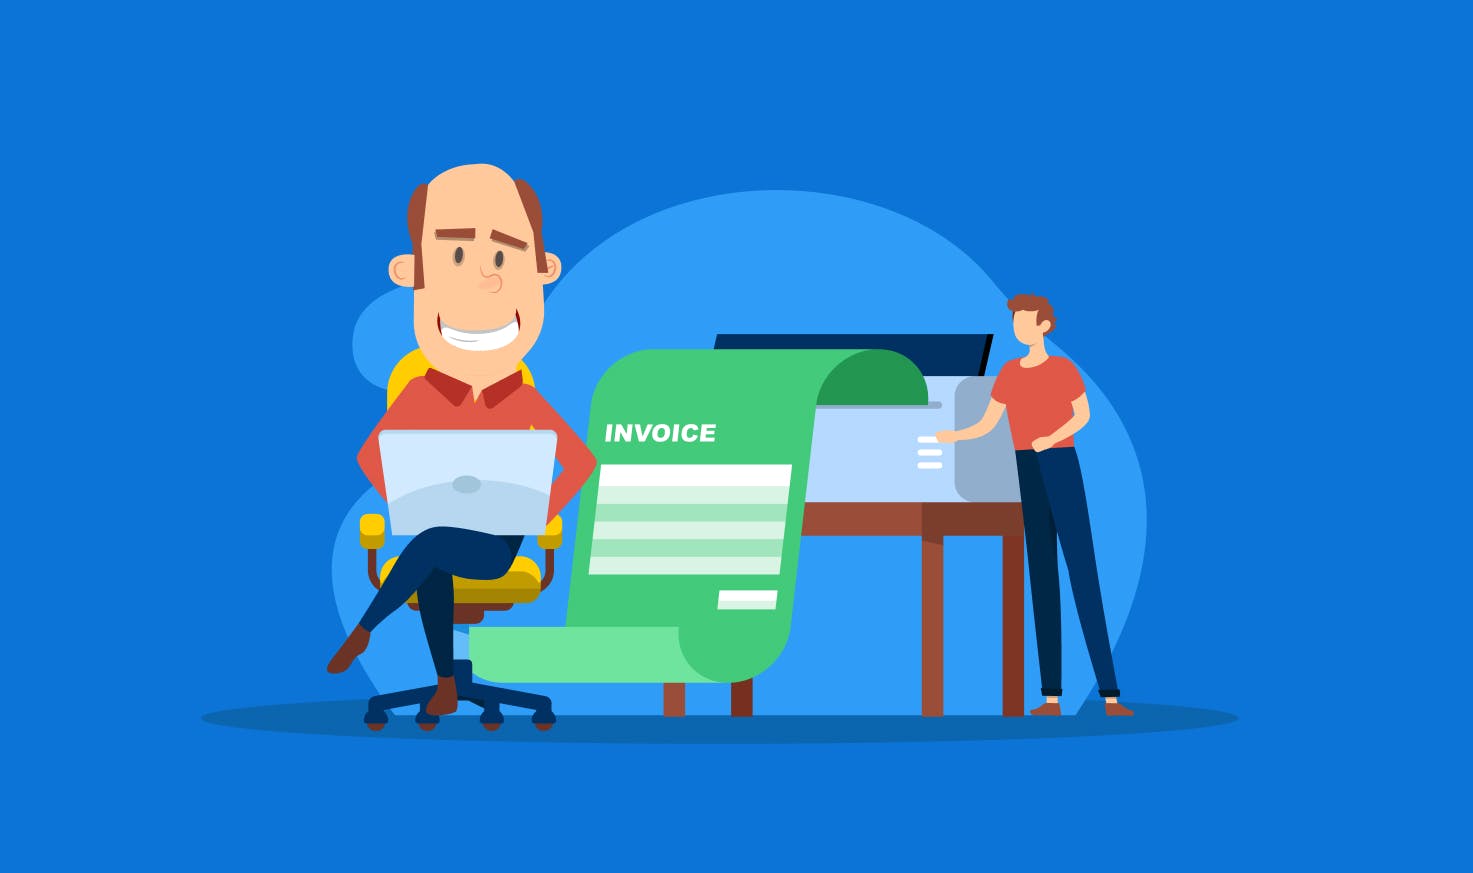 Invoice Upgrades: Client-Facing Itemized List of Products & Services